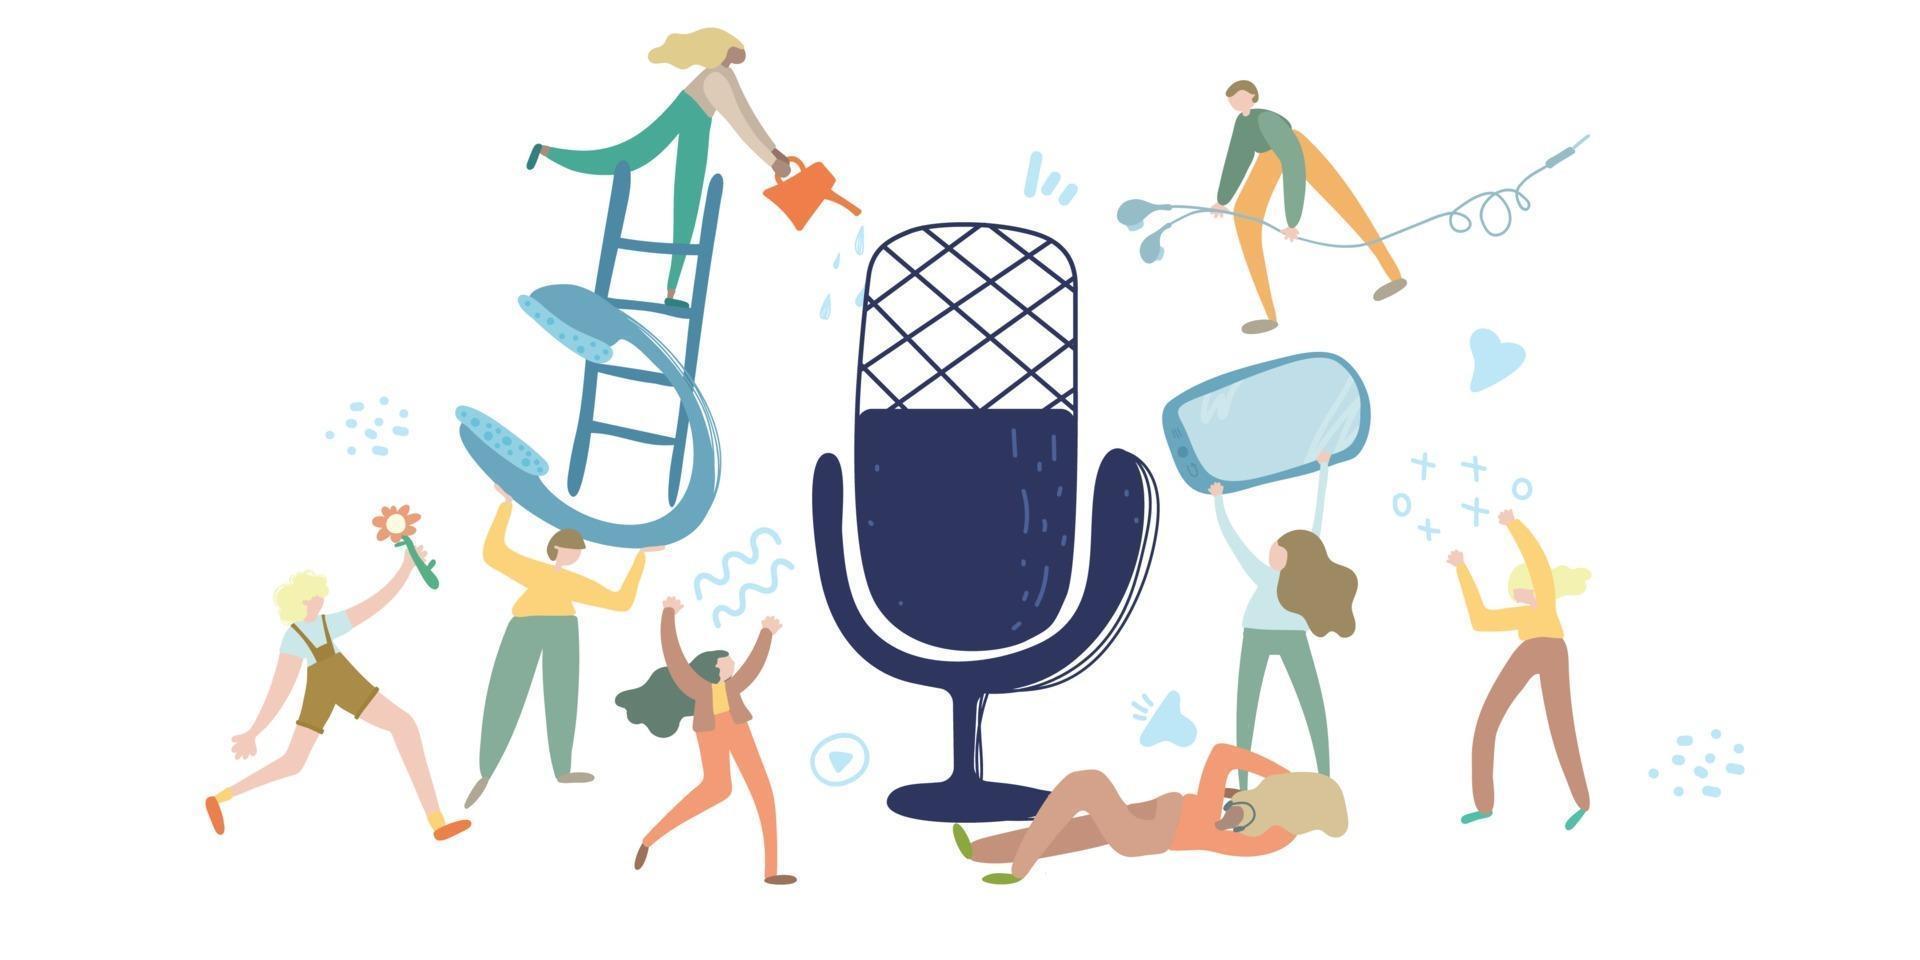 Podcast vector illustration. e-radio talk show, discussion and interview persons concept. Virtual media communication with microphone. clubhouse,audio chat concept. Influencer marketing entertainment performance business